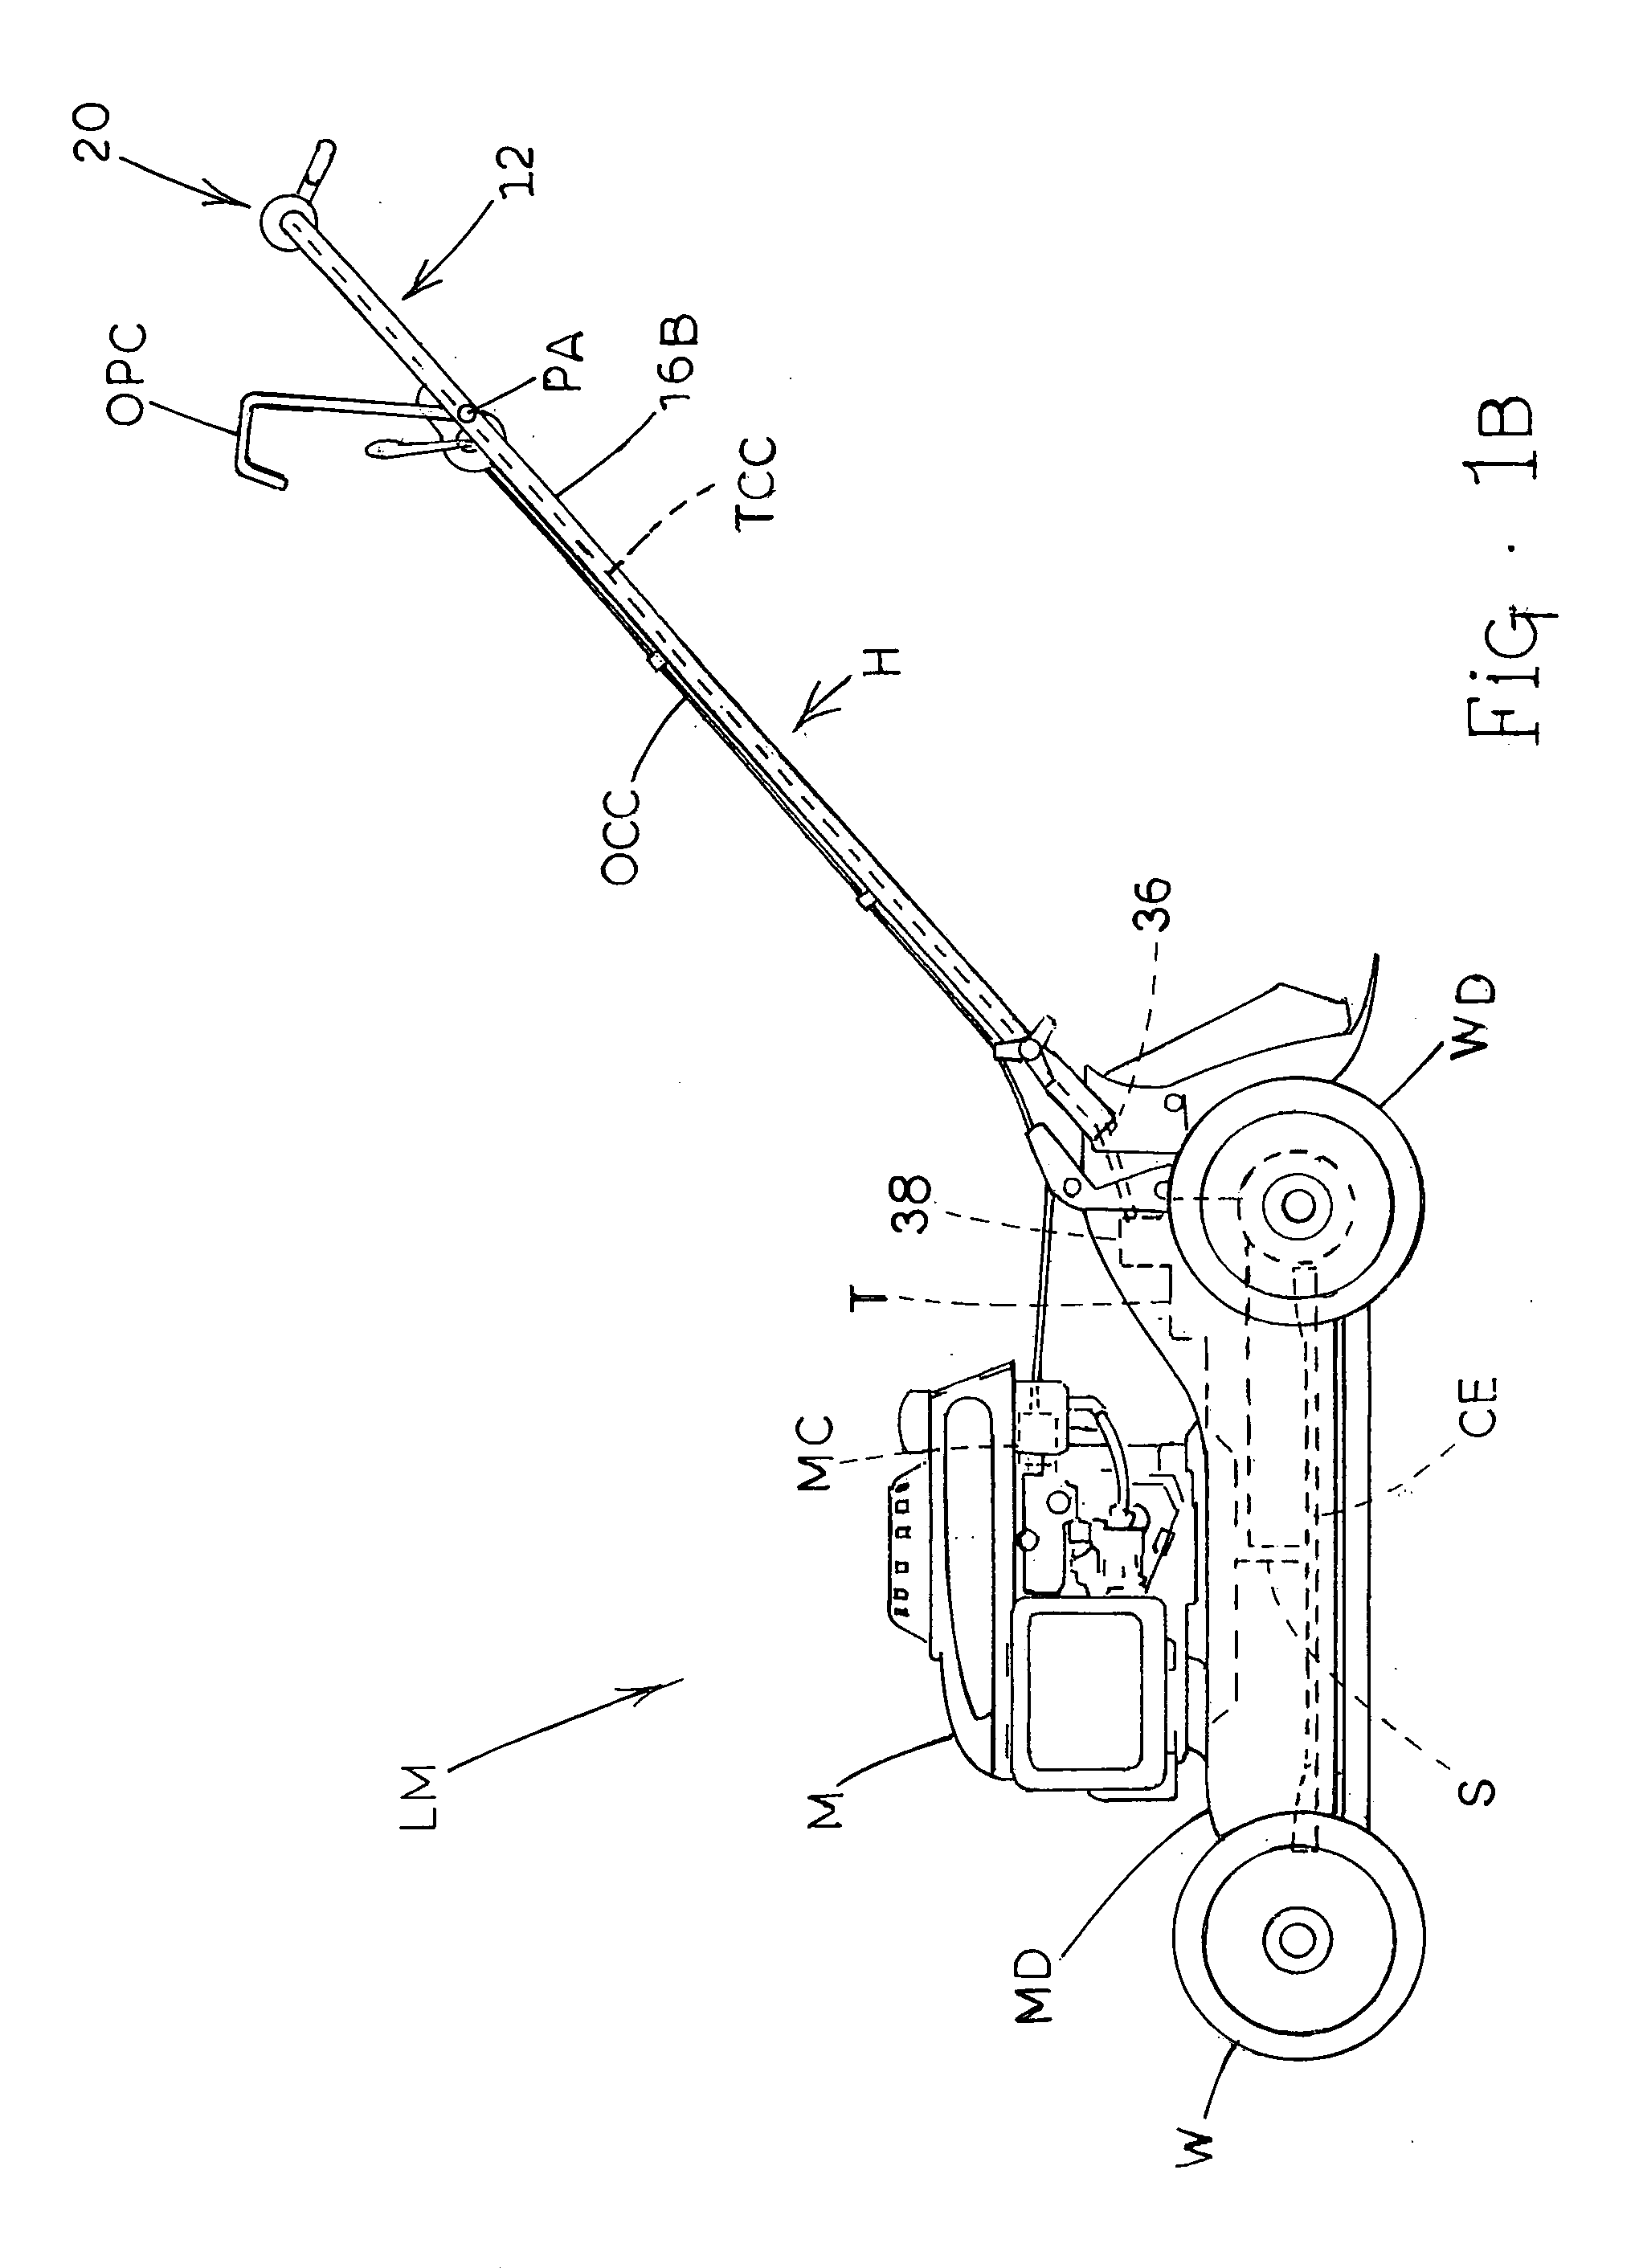 Variable speed transmission twist control apparatuses and methods for self-propelled mowing machine